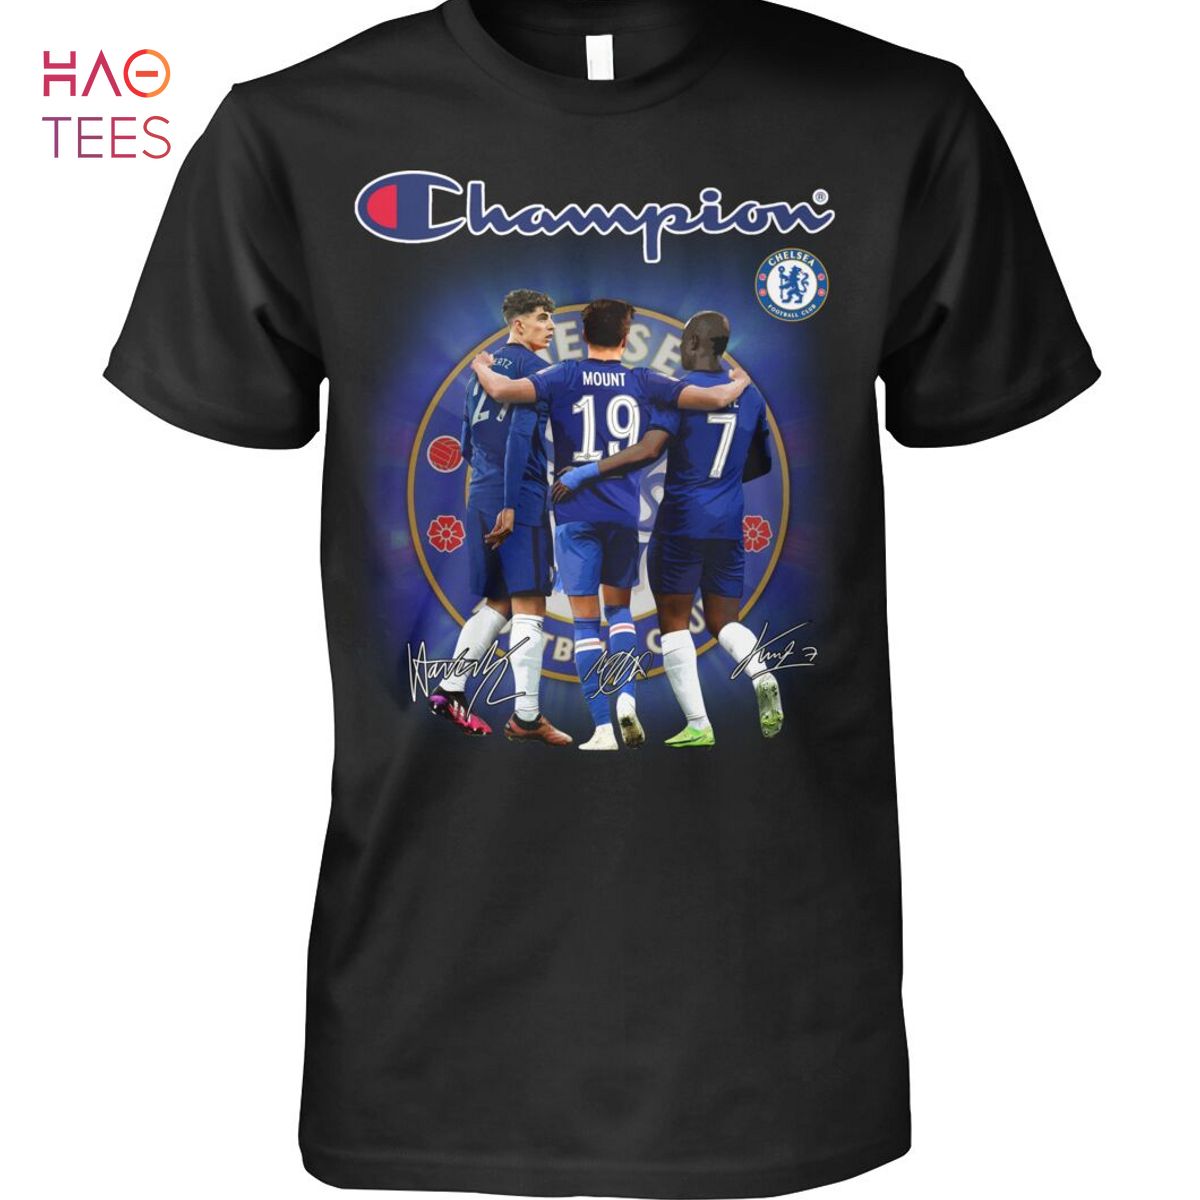 Championd Chelsea Shirt Limited Edition